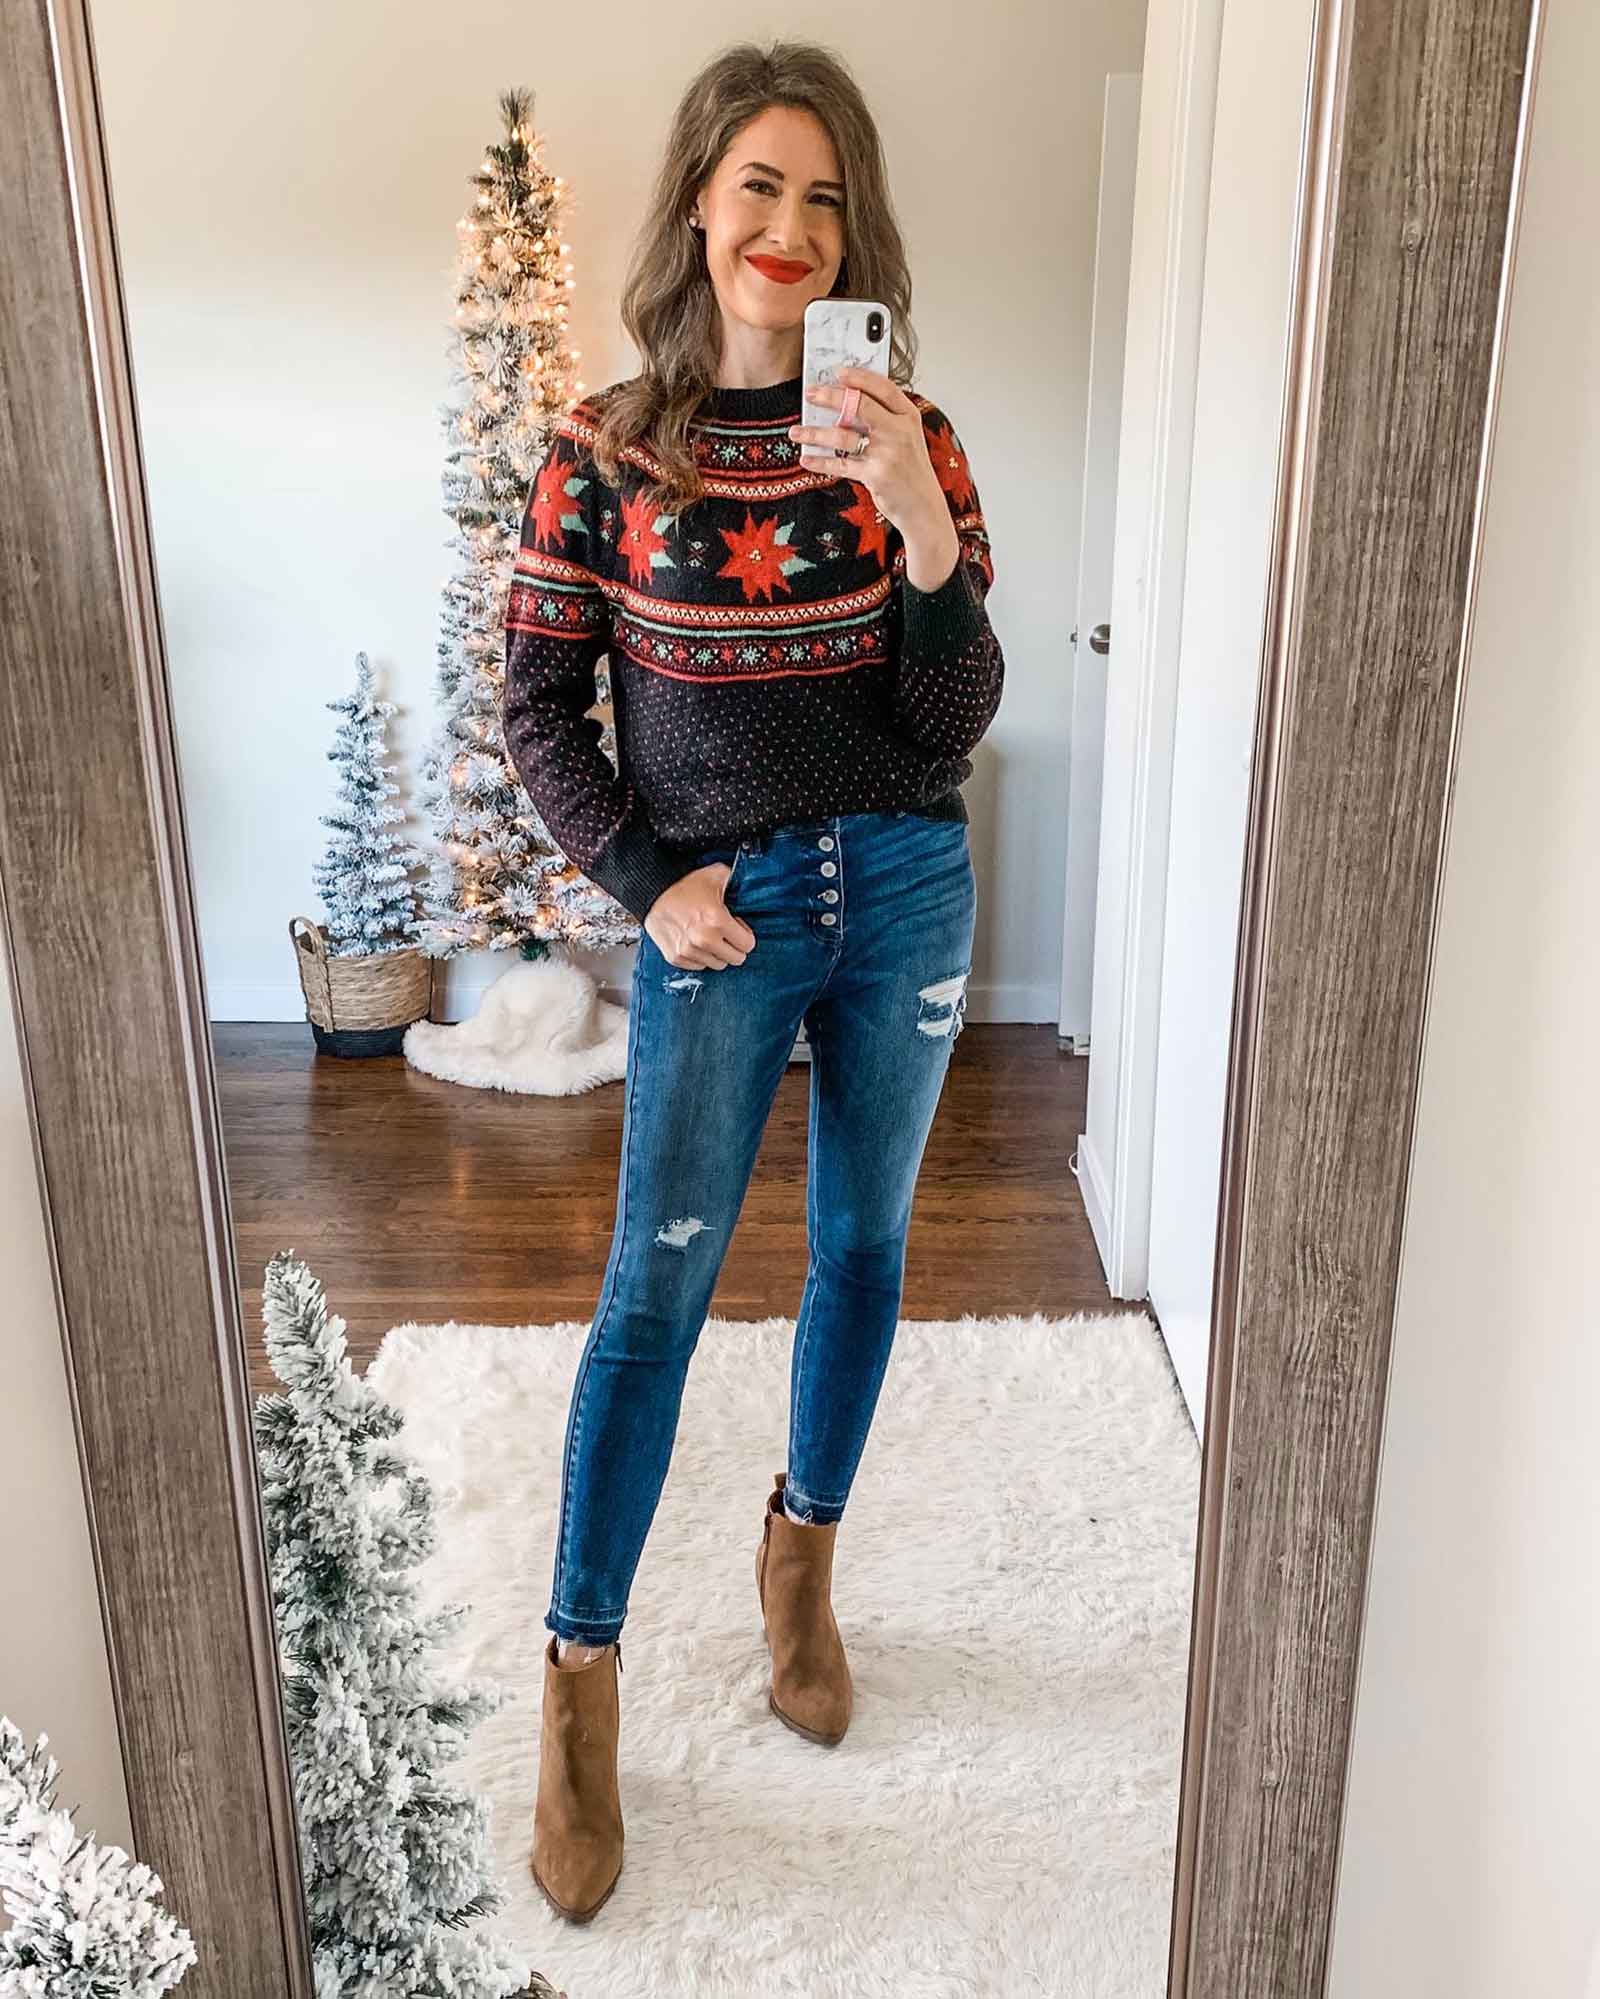 Last minute affordable holiday outfits from Walmart